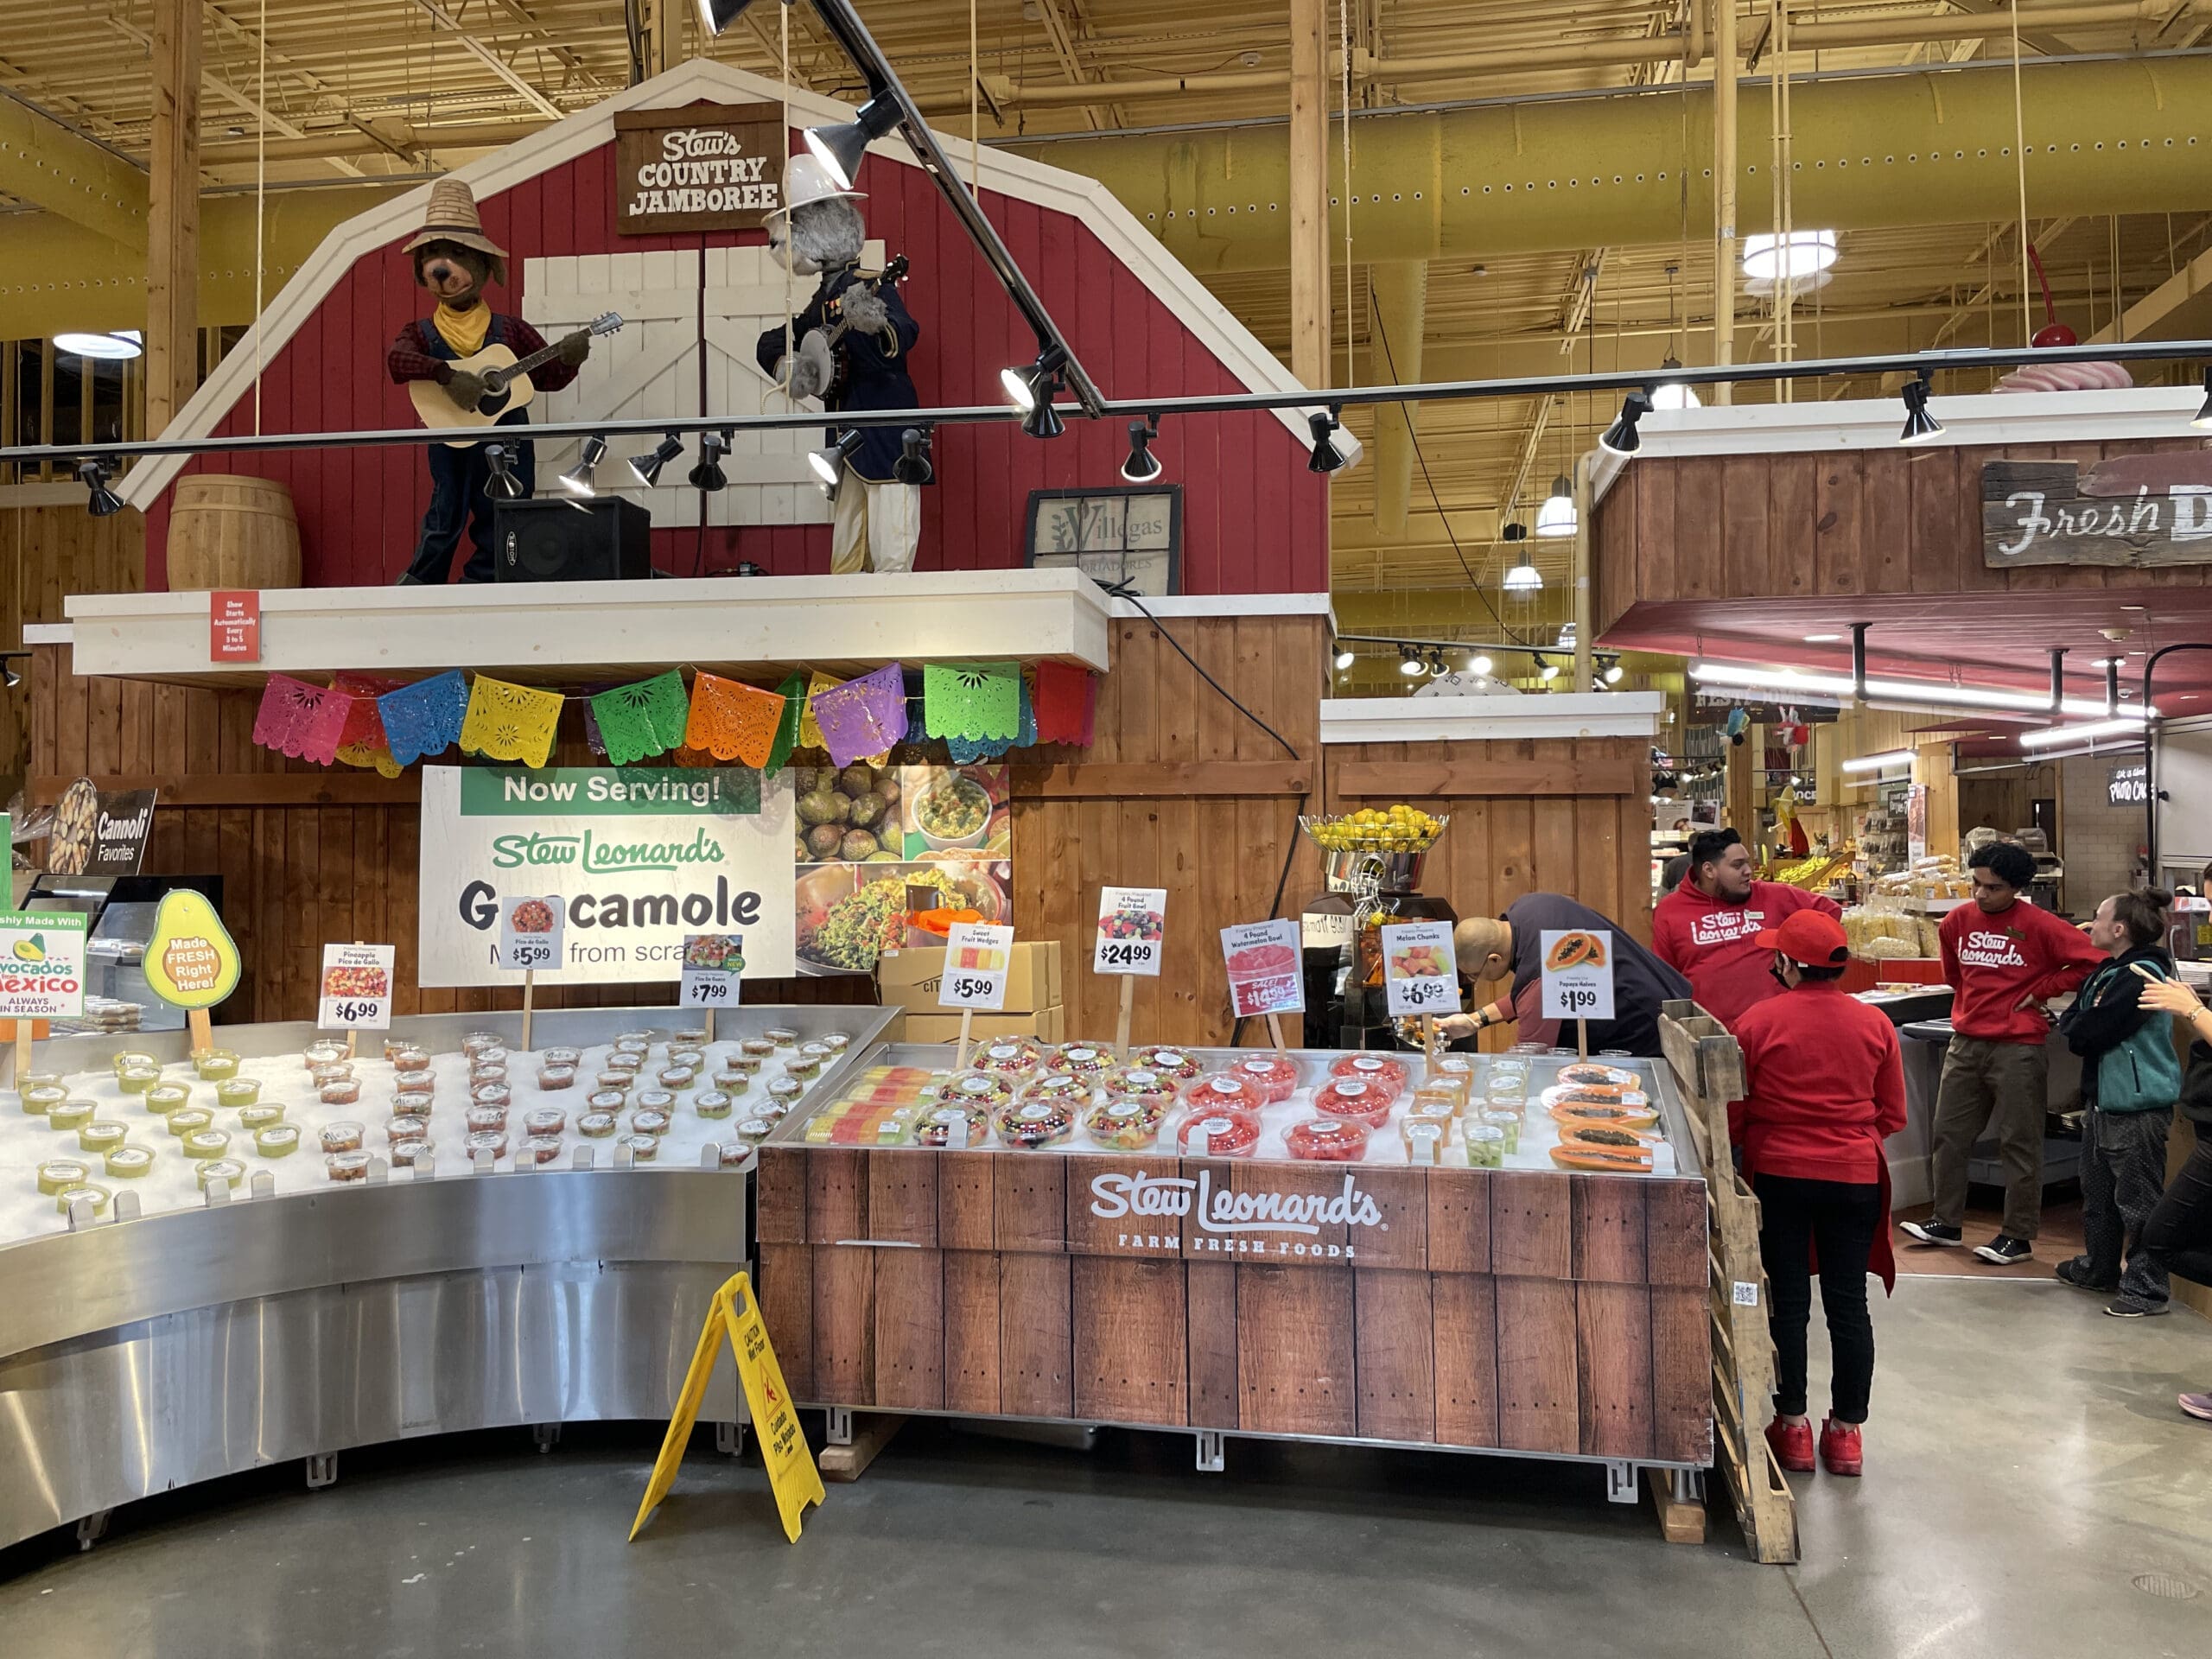 A store display promotes Staun Leonard's guacamole with various guacamole containers on ice next to a commercial juicer highlighting Citrus America products. Decor includes colorful banners, farm-themed cutouts, and signs with the prices and promotions. Several staff members in red shirts assist customers in the background.